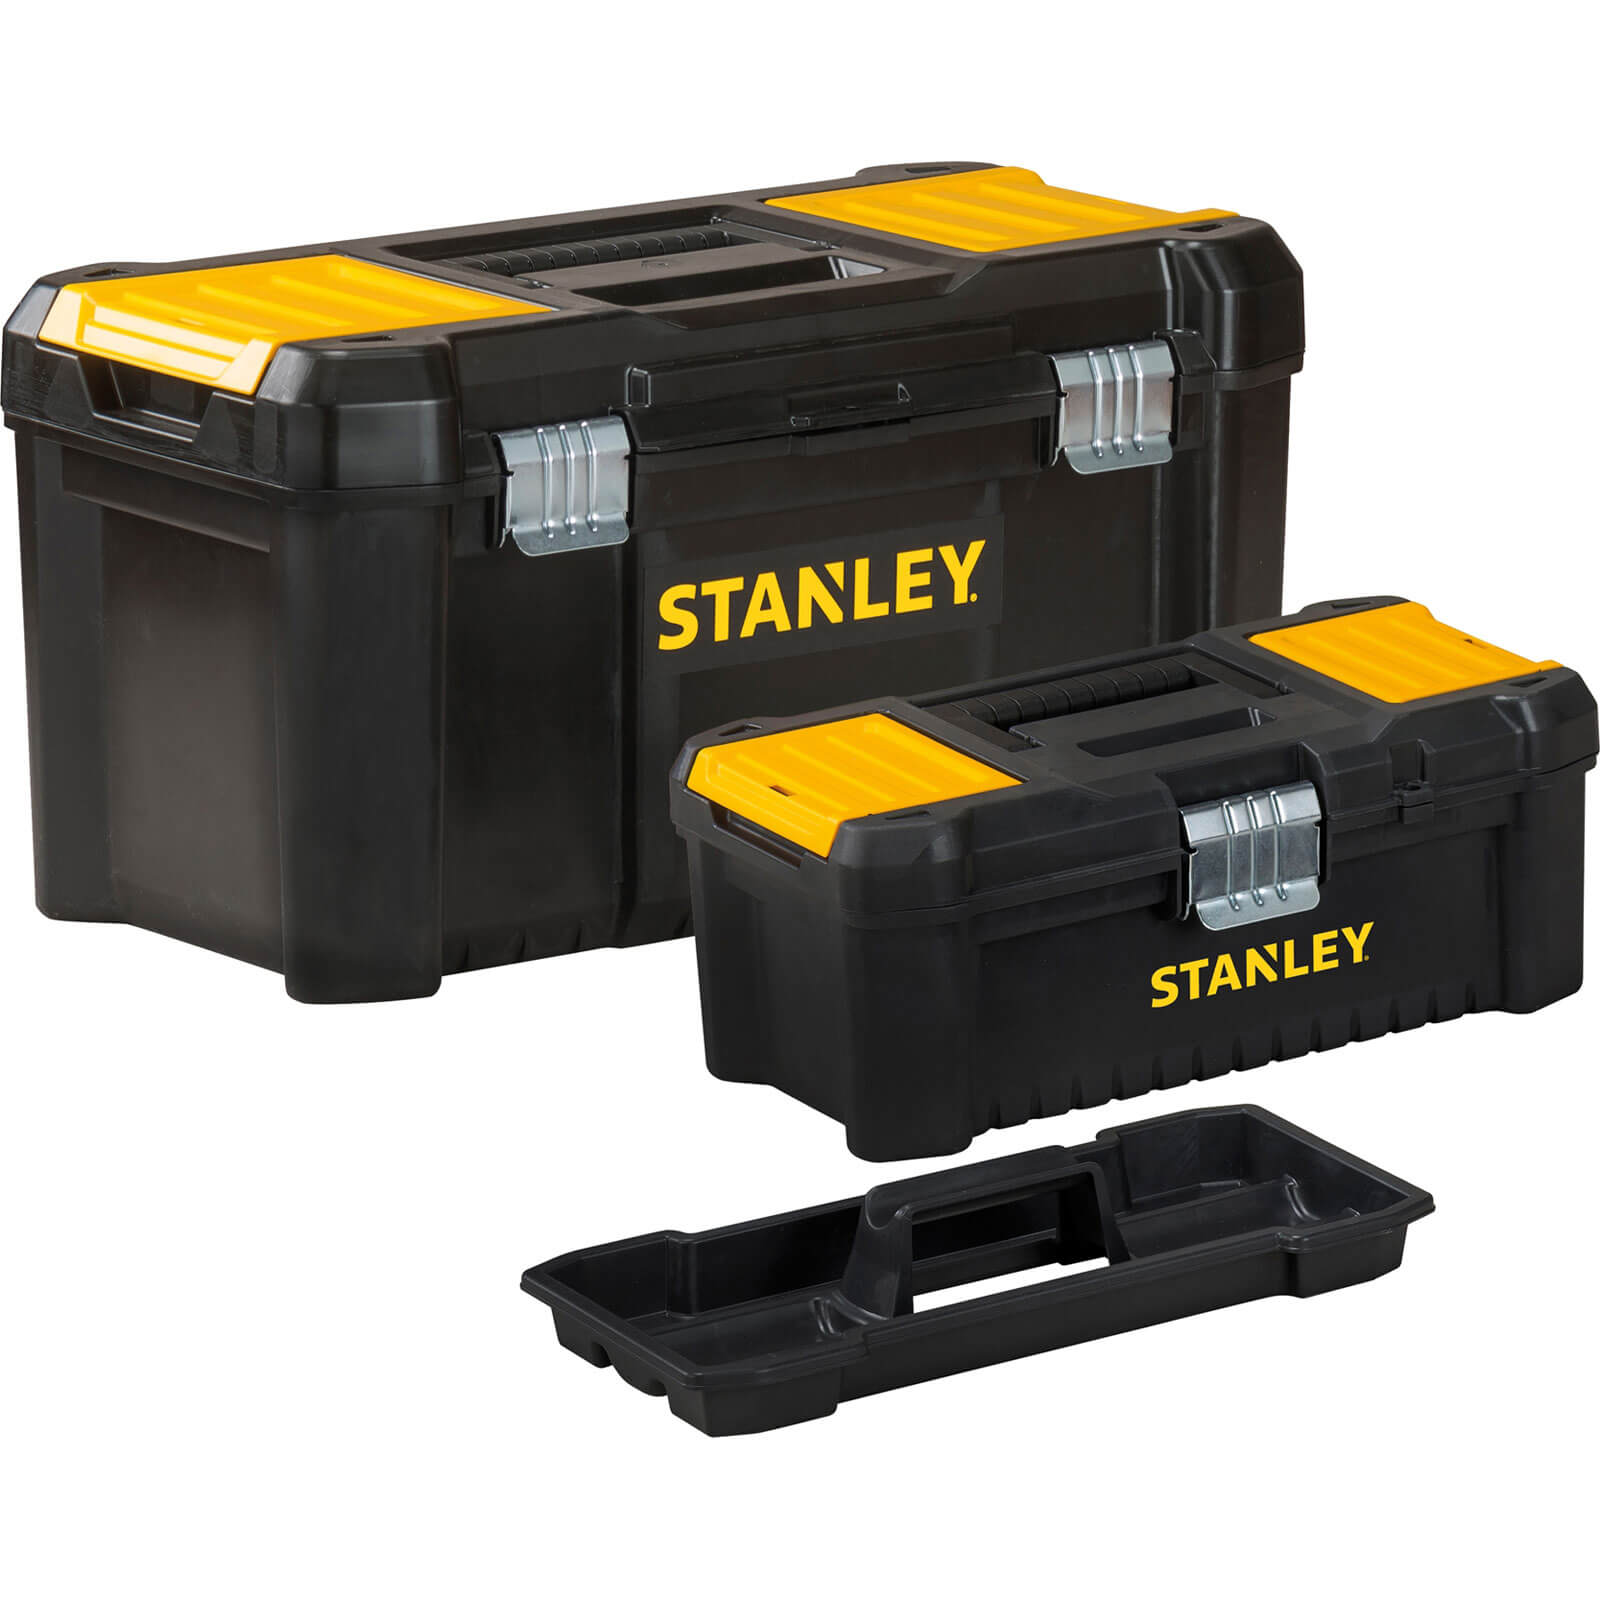 Image of Stanley 2 Piece Essential Tool Box Set